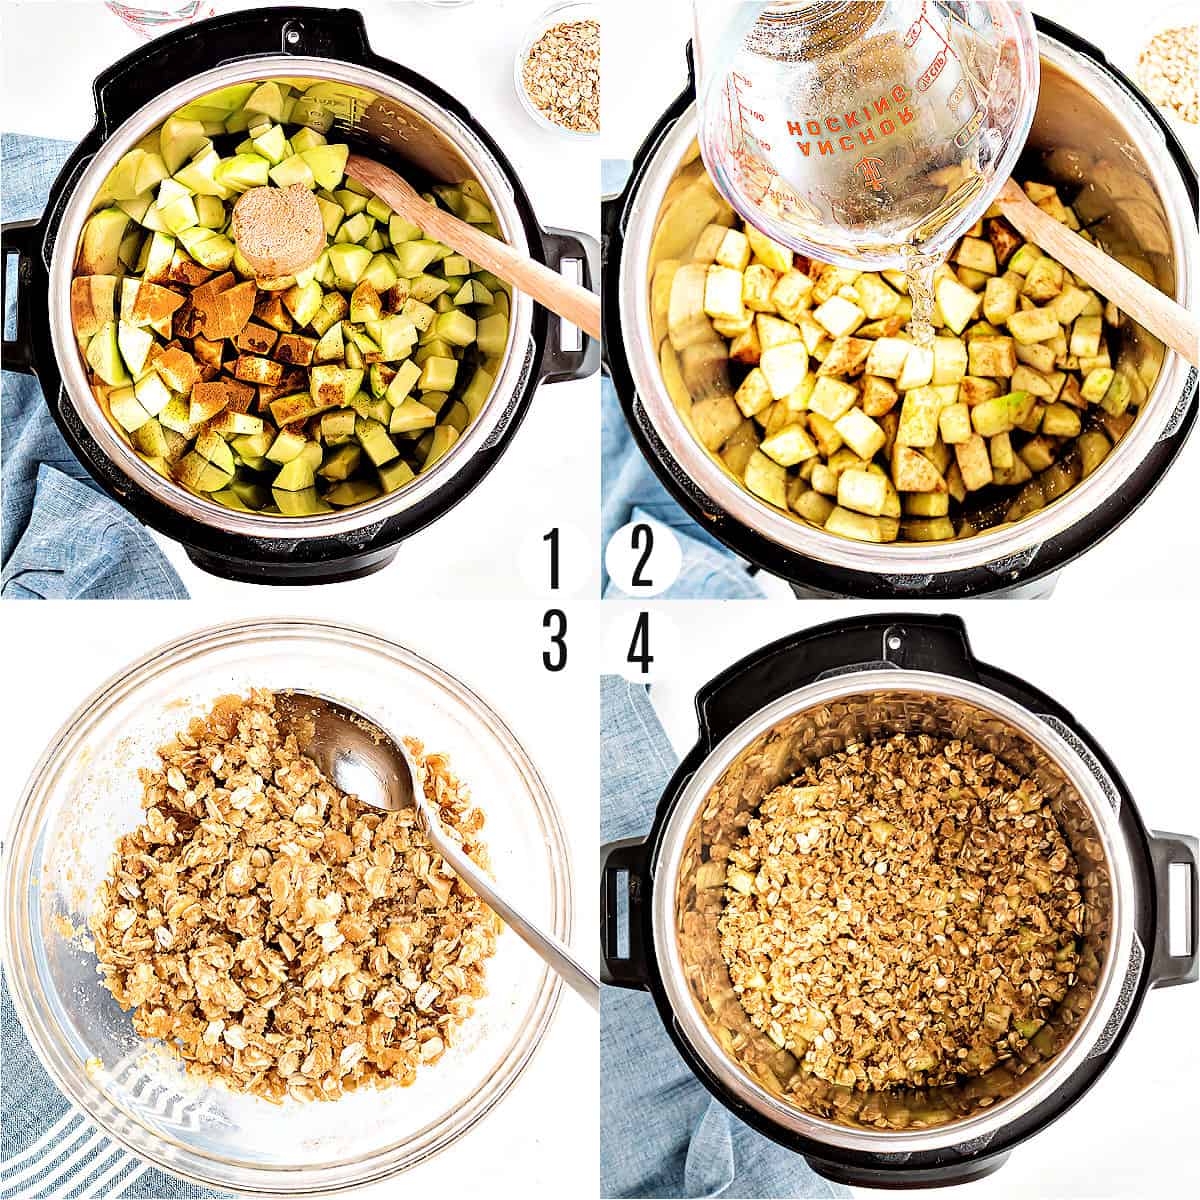 Step by step photos showing how to make Instant Pot Apple Crisp.